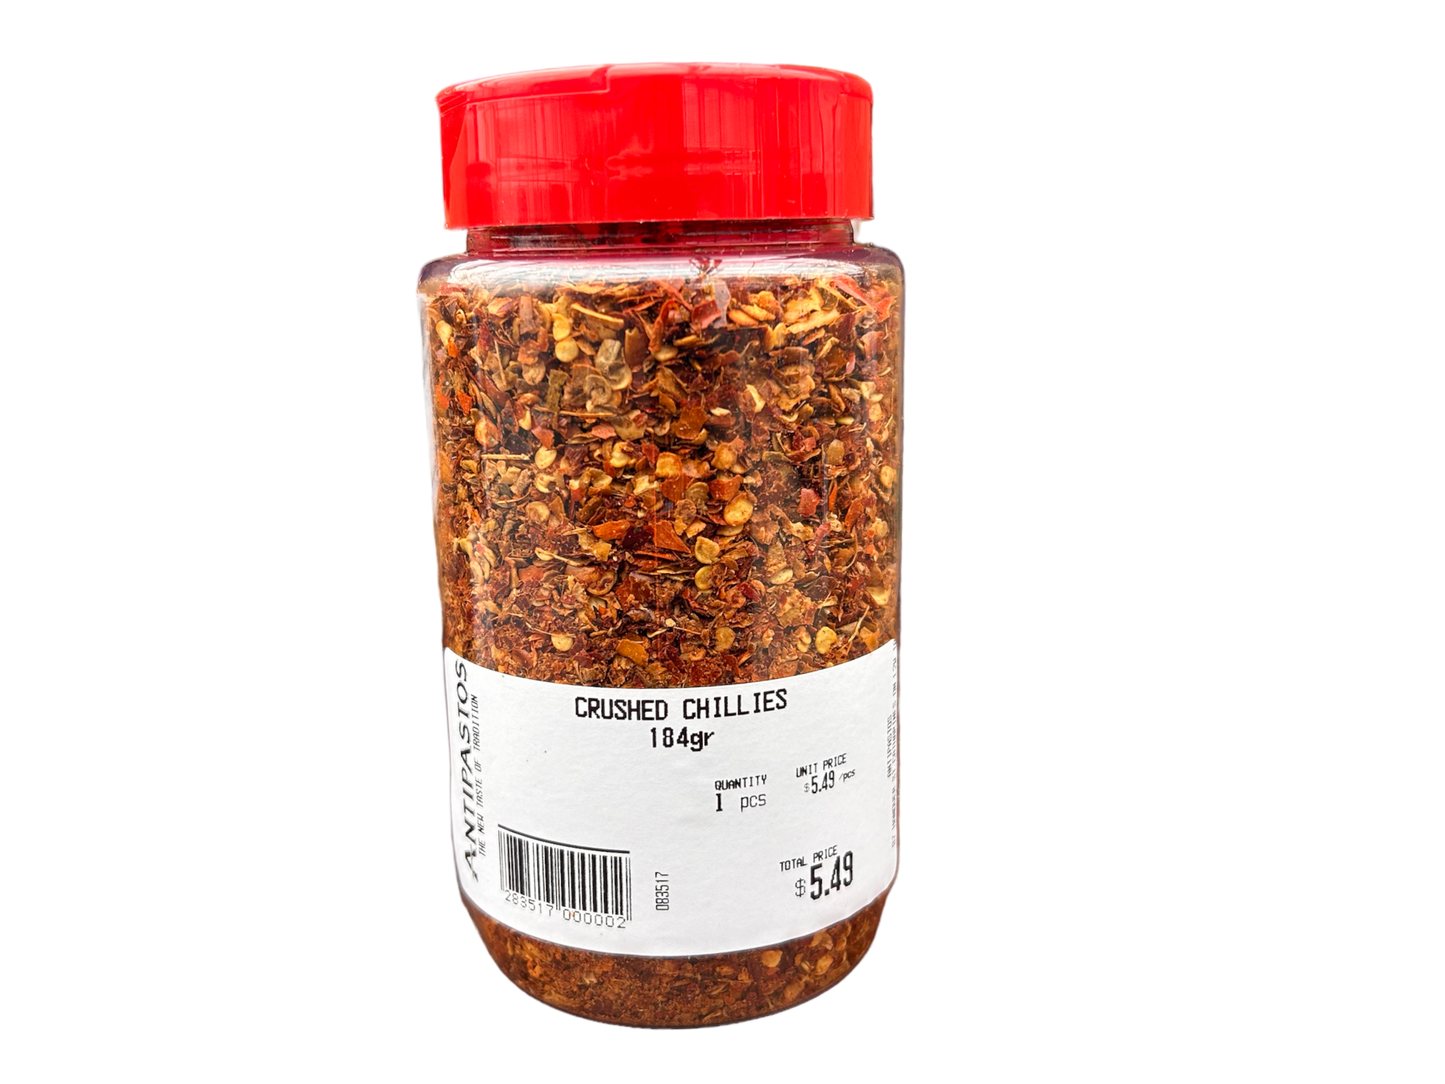 Crushed Chillies 184g